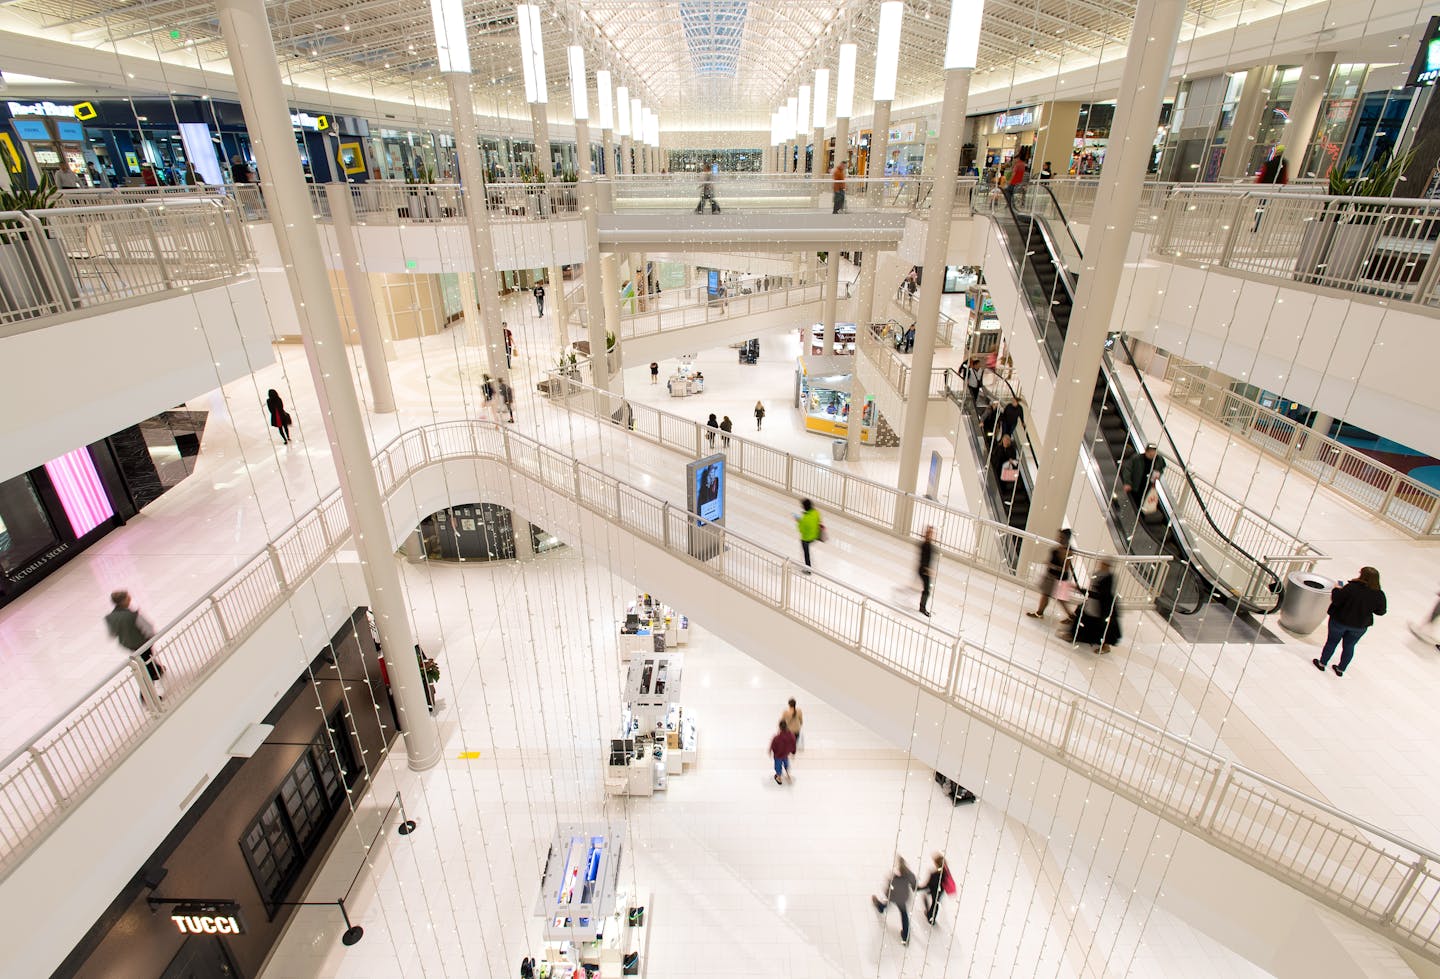 Why was the Mall of America built in Minnesota?